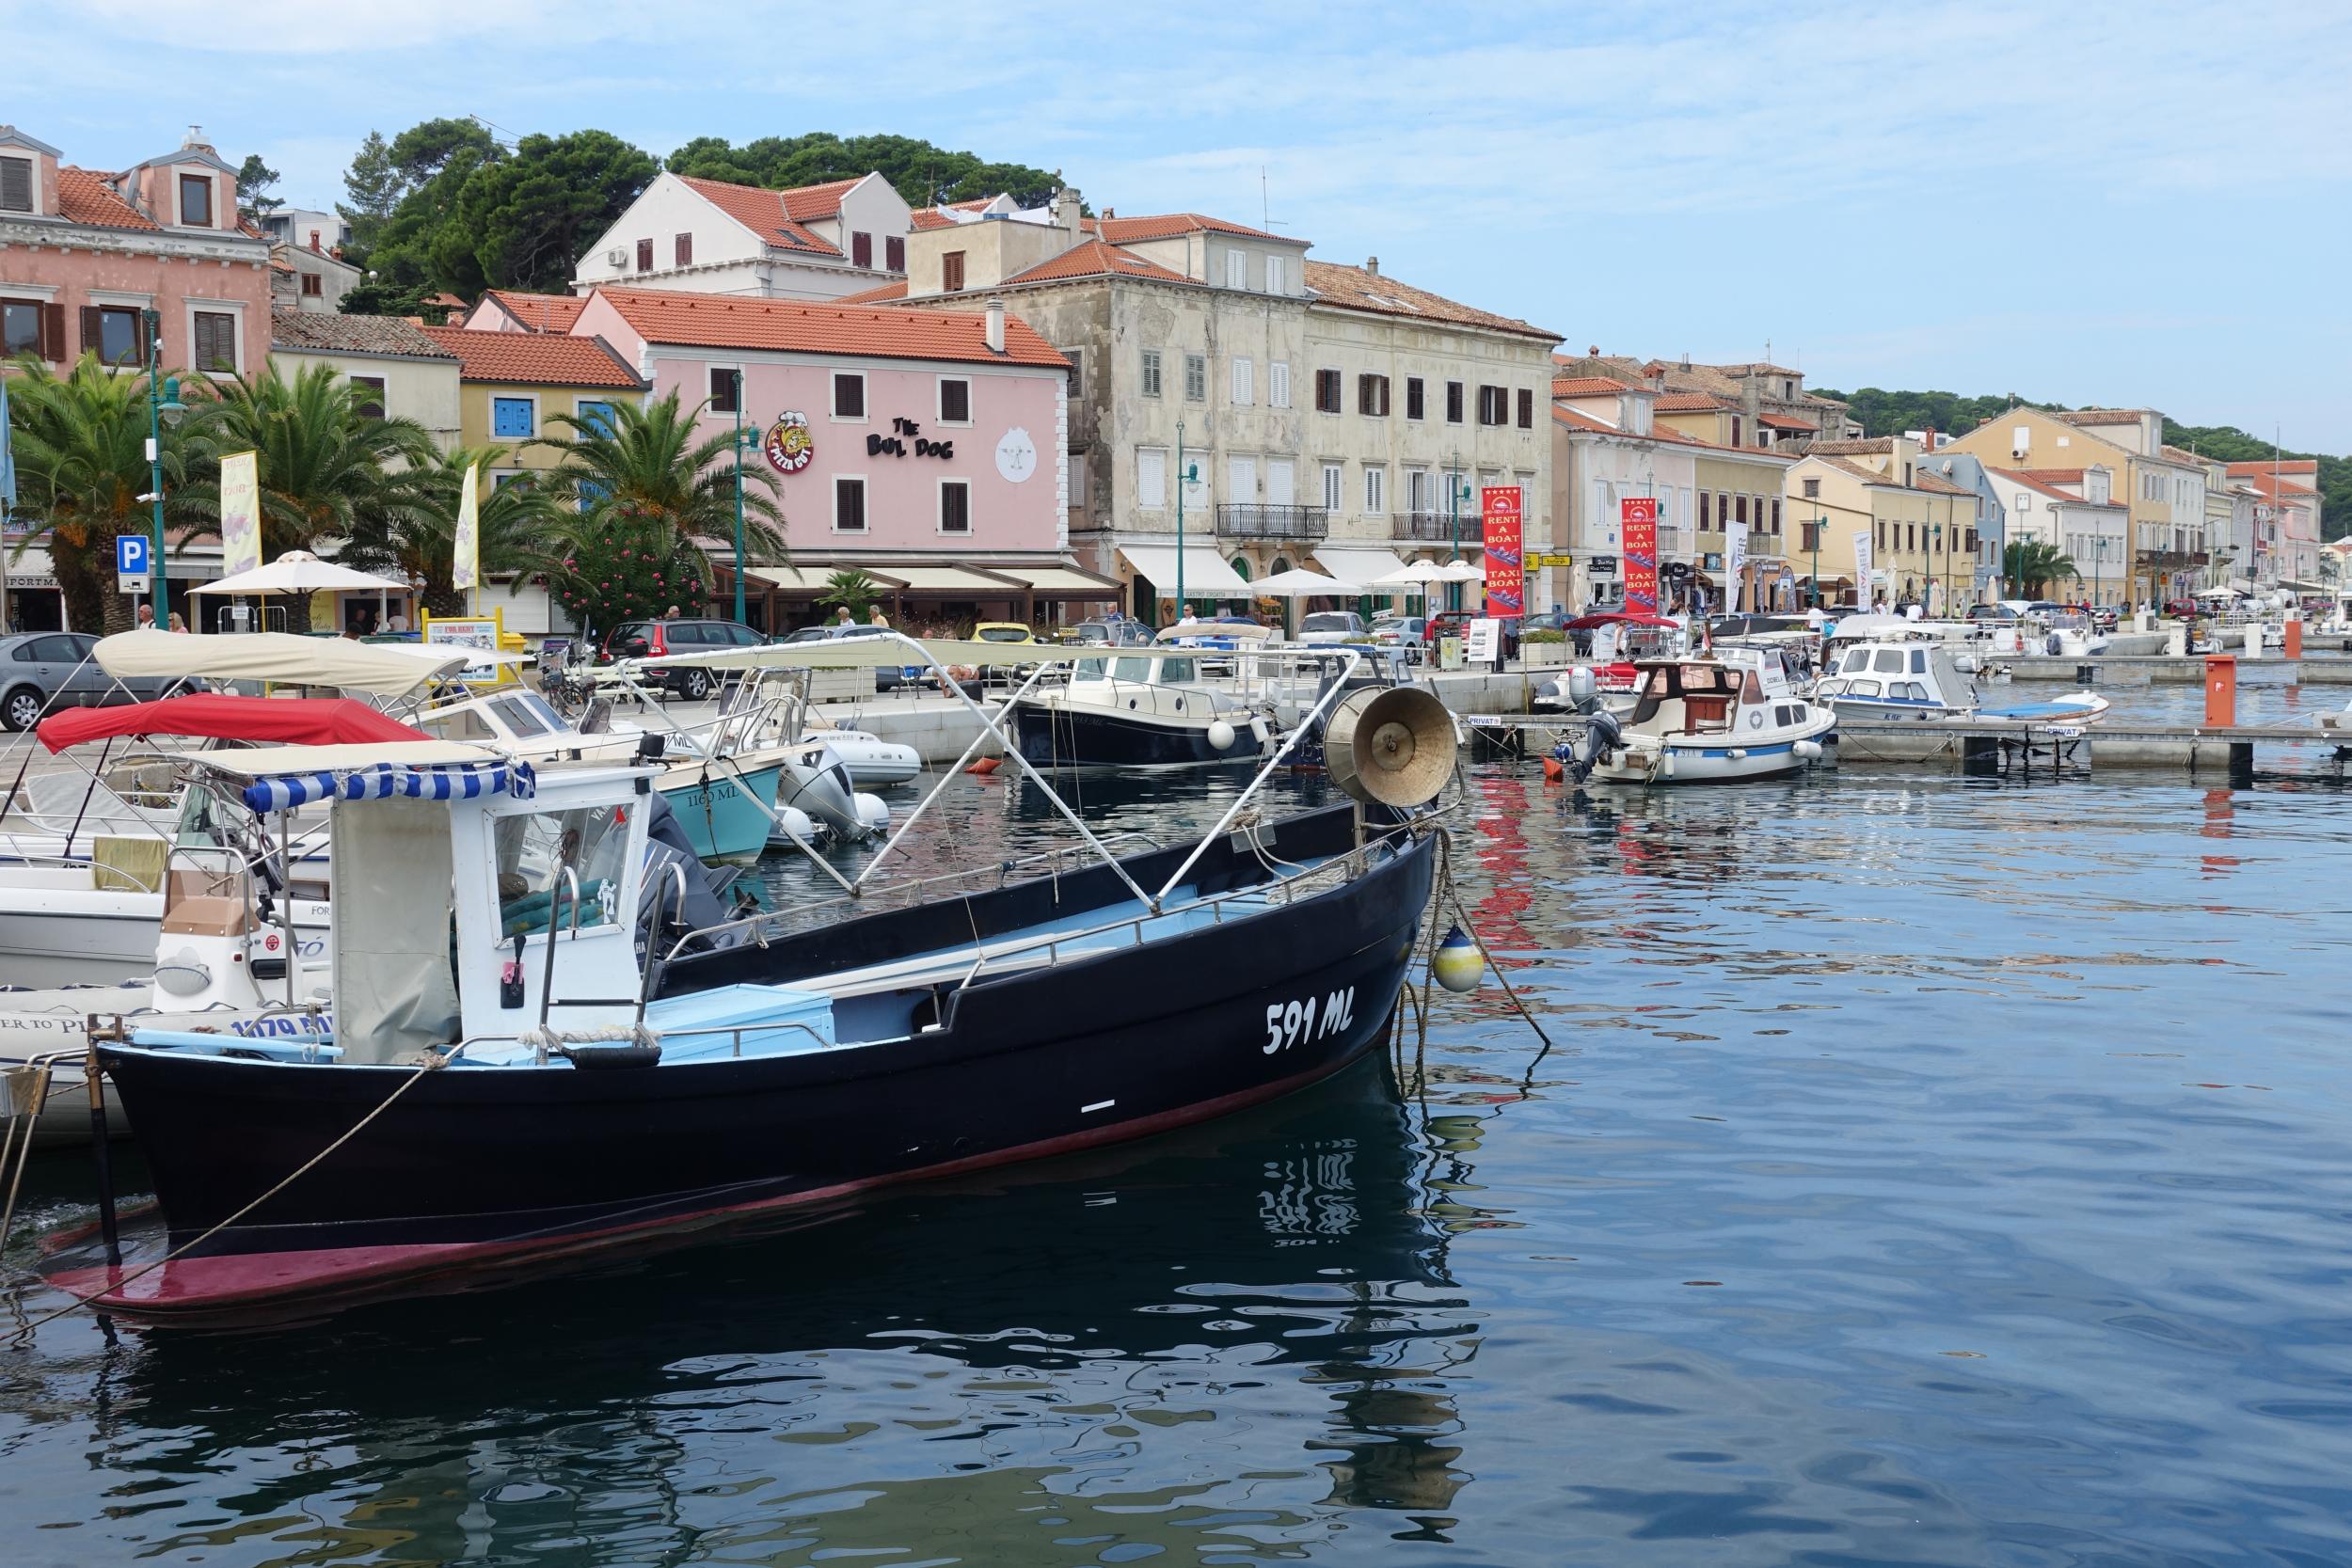 Boat trips and forested trails await in Losinj